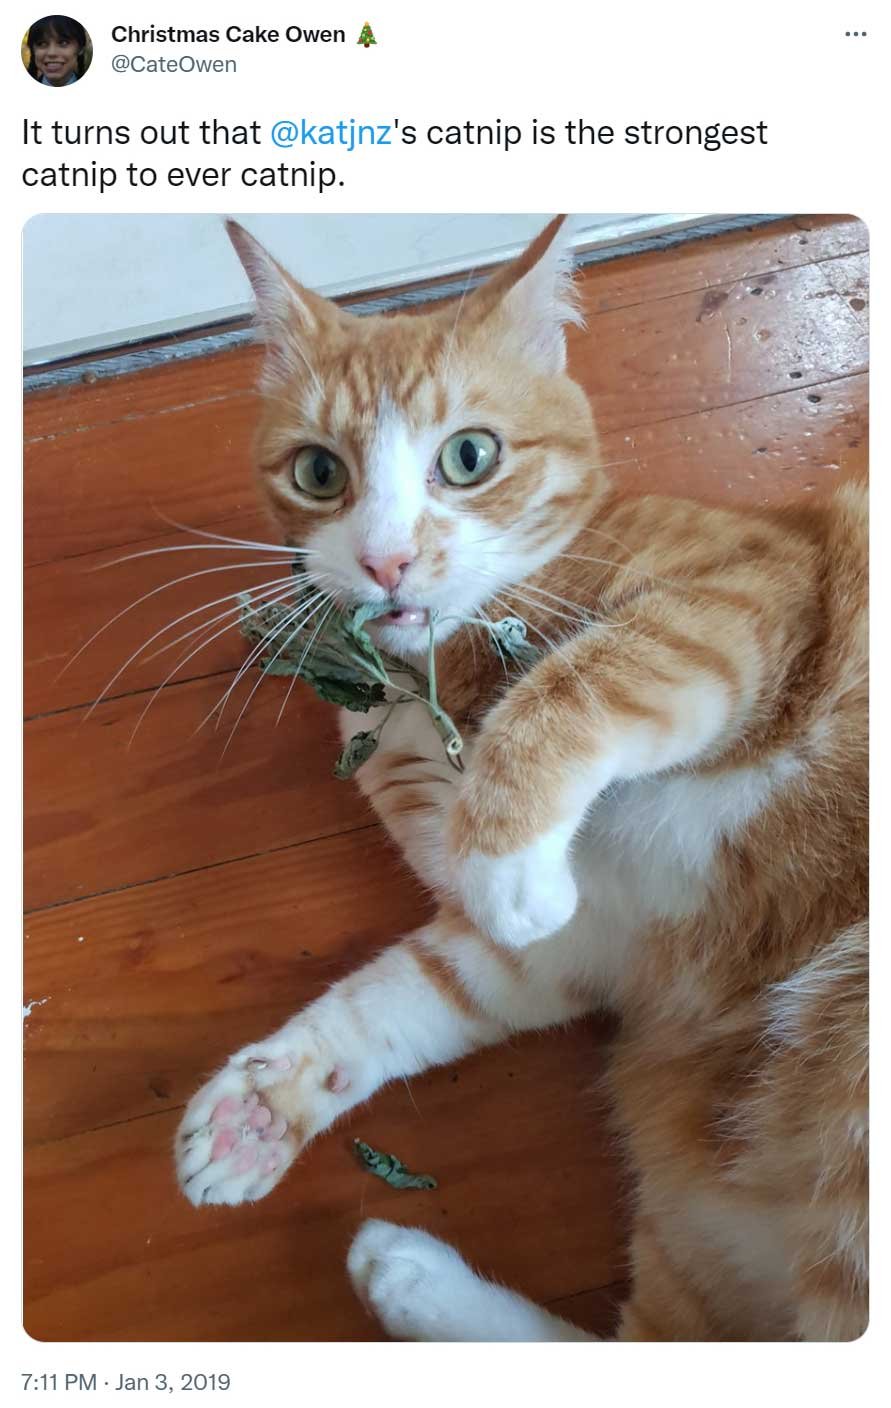 Tweet from @cateowen on Twitter: 'It turns out that @katjnz's catnip is the strongest catnip to ever catnip.'